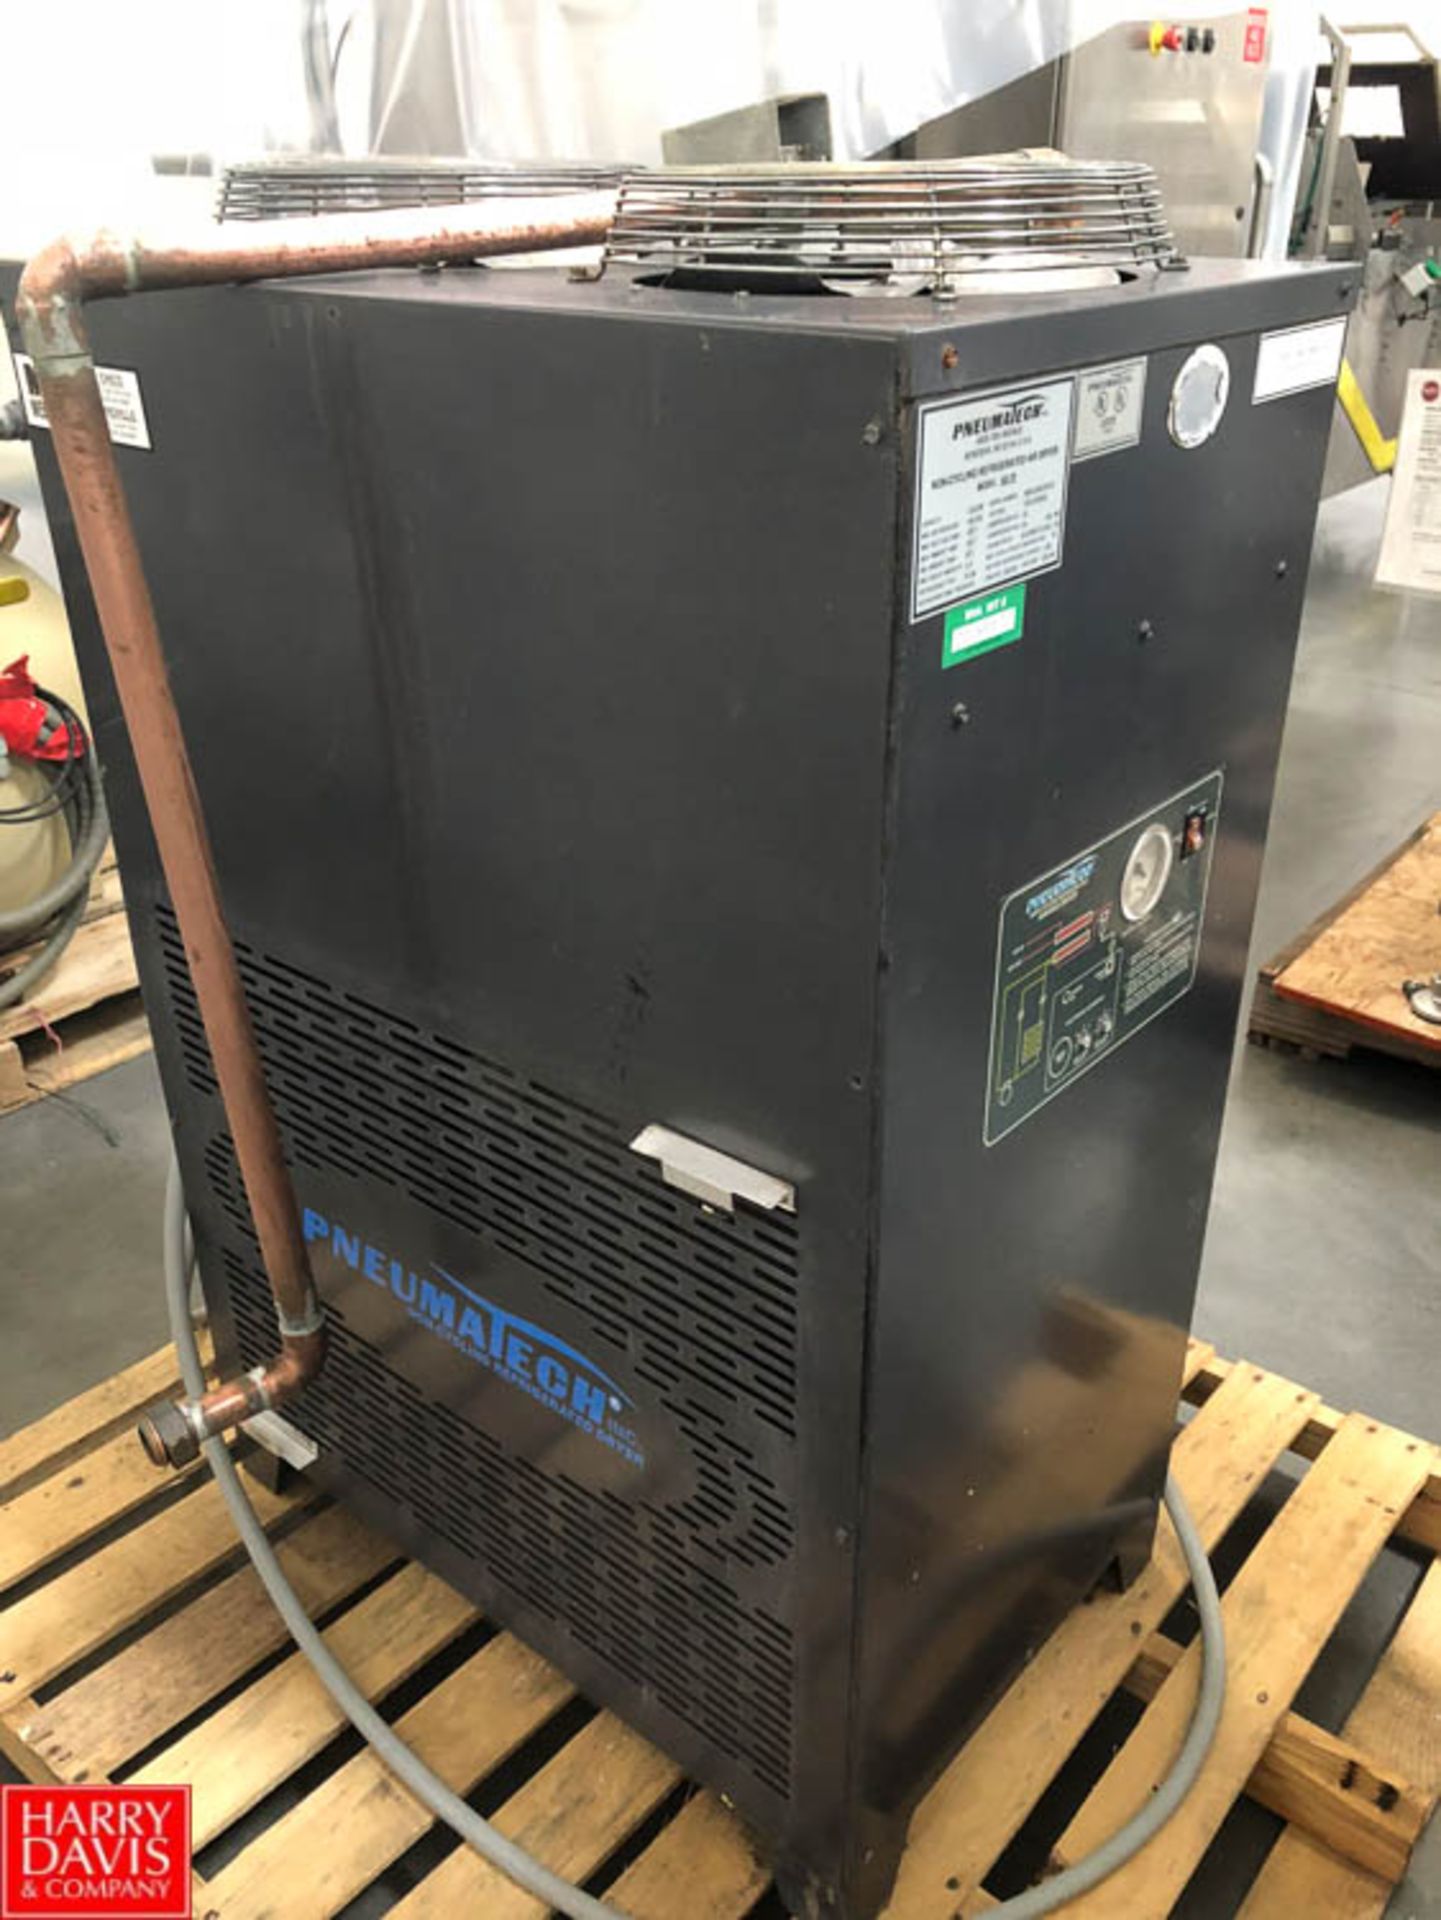 Pneumatech 75 CFM Refrigerated Air Dryer, Model: AD-75, S/N: 0403-A14027PA-ST Rigging Fee: 75